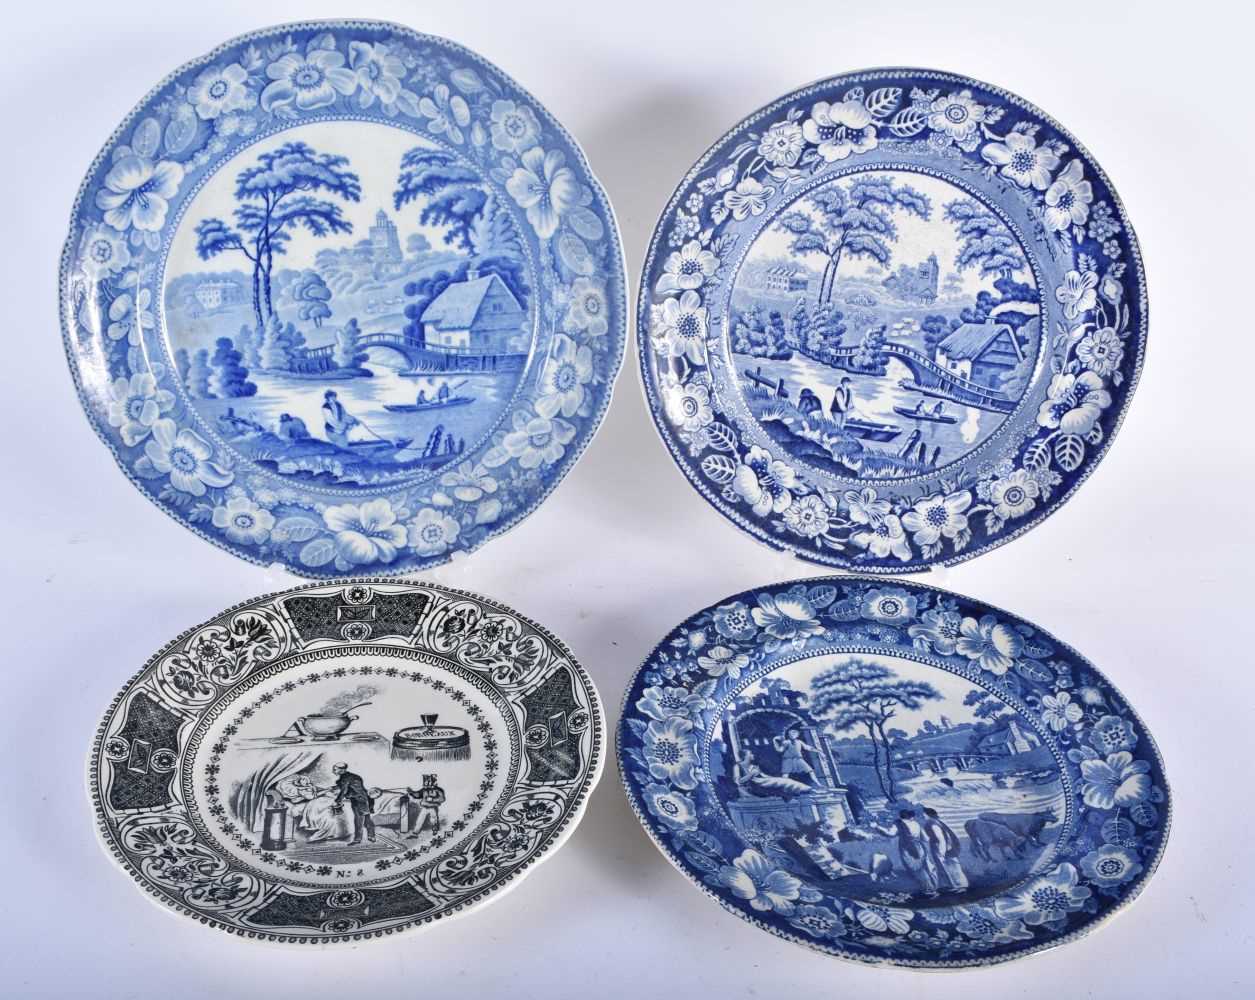 THREE ANTIQUE BLUE AND WHITE POTTERY PLATES together with a French Gien dish. 24 cm wide. (4)